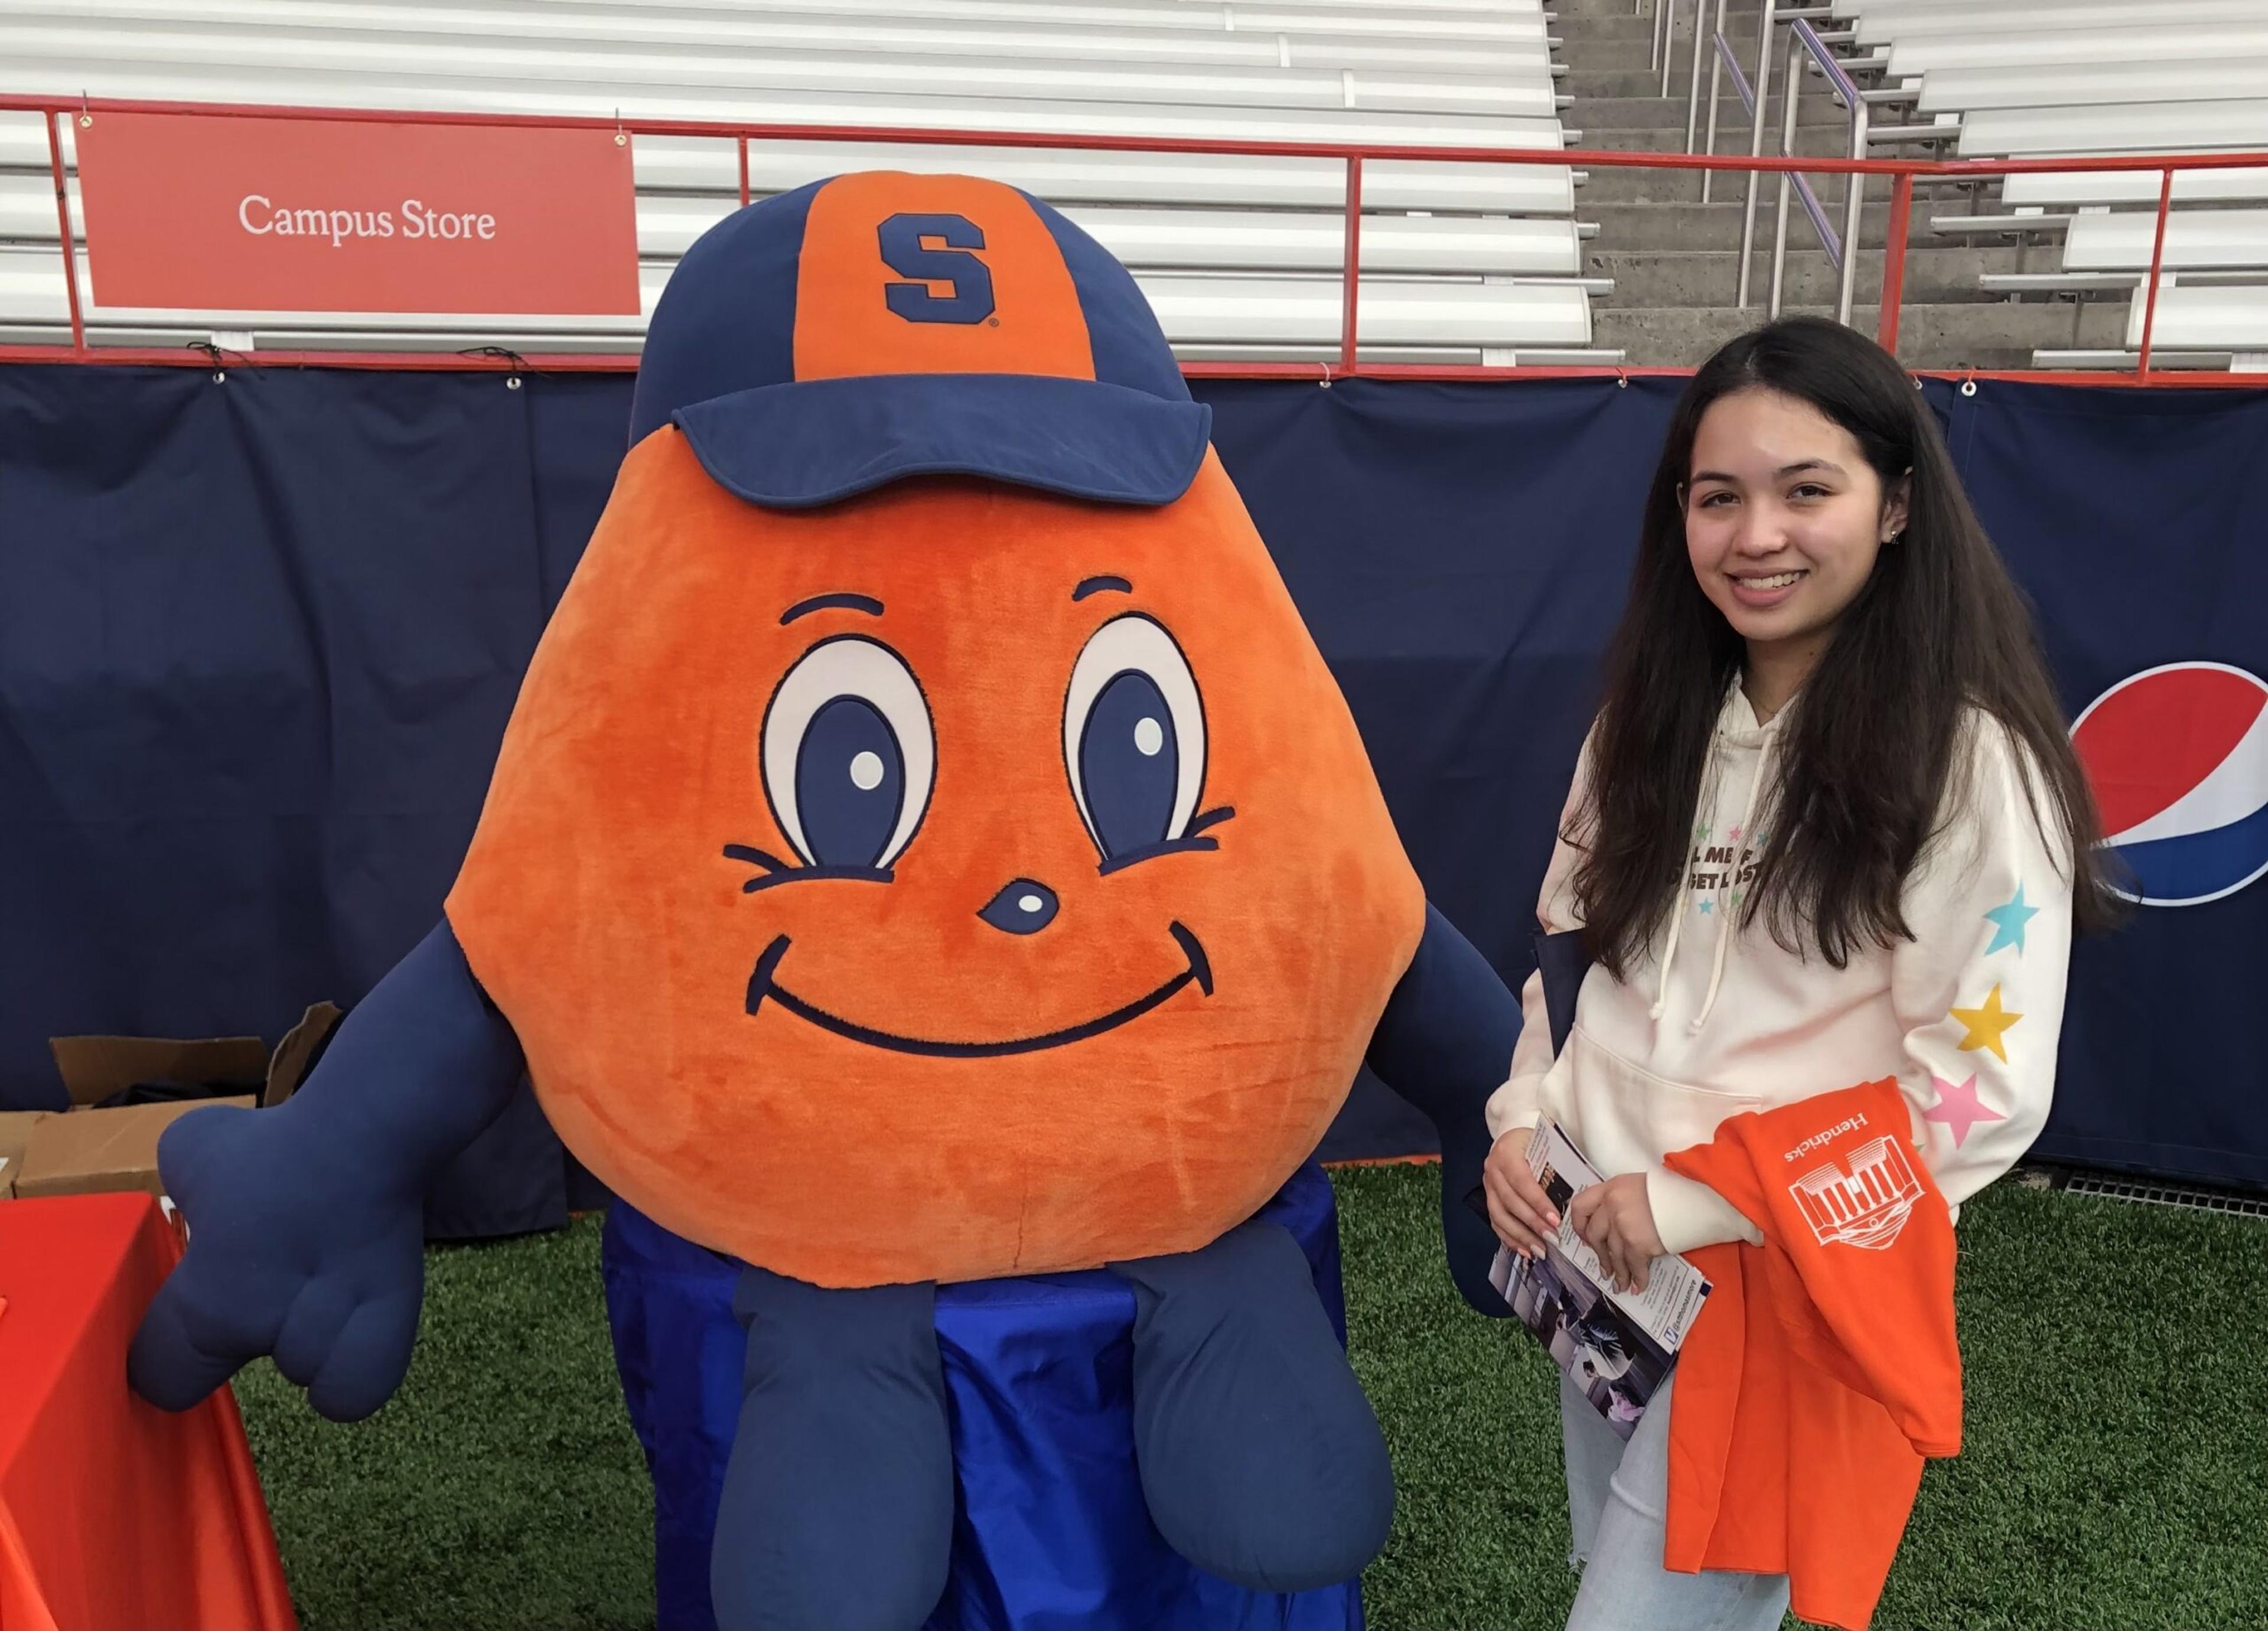 Caitlyn Begosa is a corporate communications intern at Blue Cross Blue Shield of Michigan. Caitlyn is a rising sophomore at Syracuse University, studying Magazine, News and Digital Journalism at the S.I. Newhouse School of Public Communications.